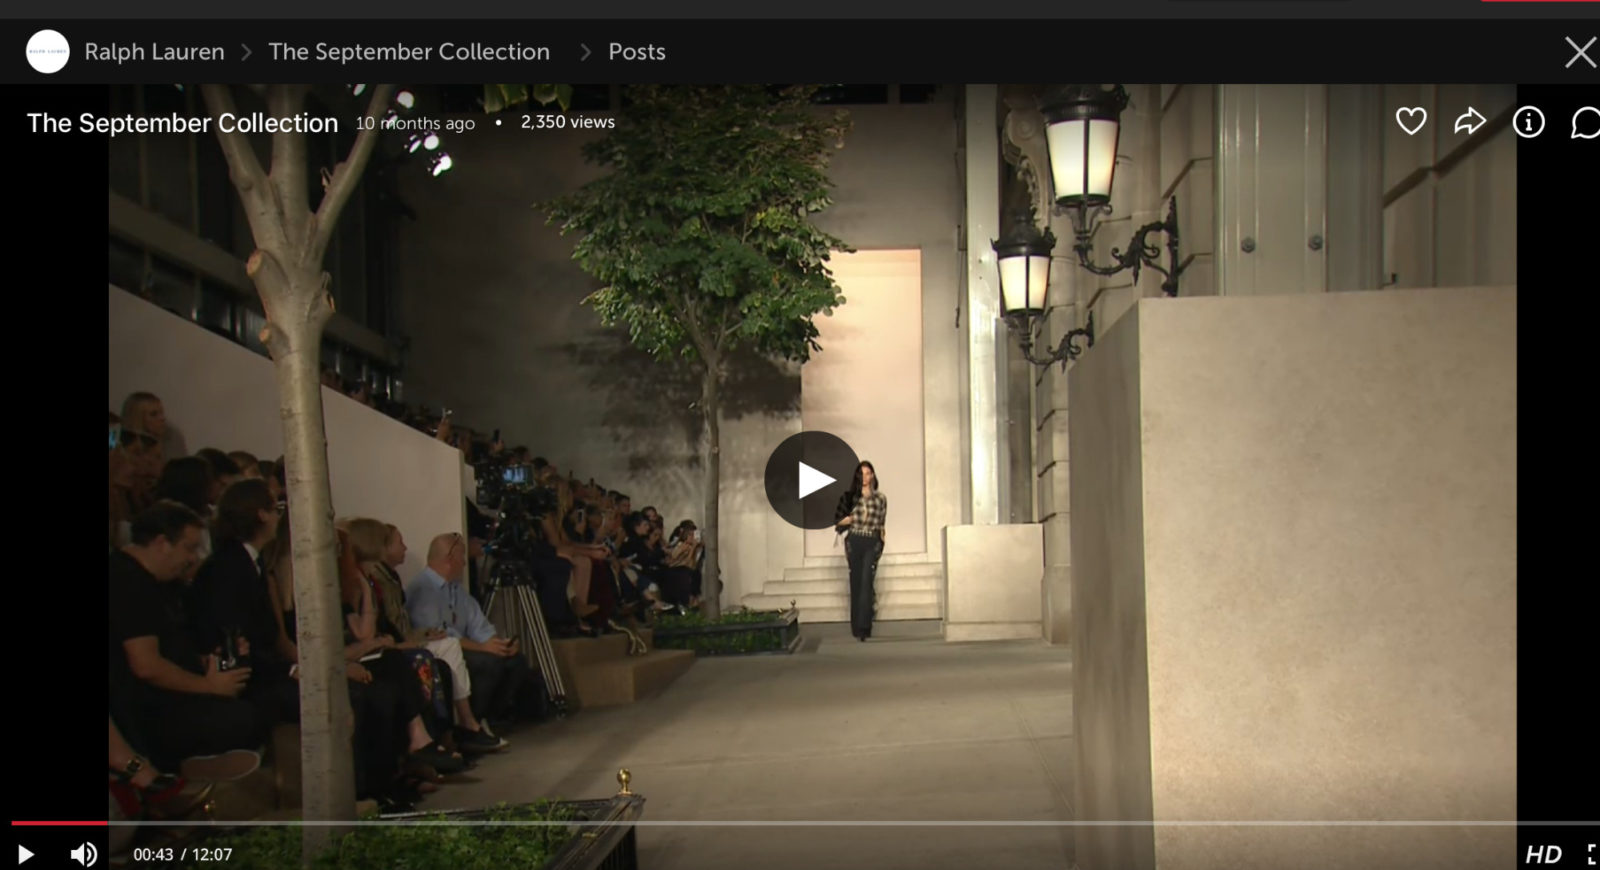 live streaming of a Ralph Lauren fashion show